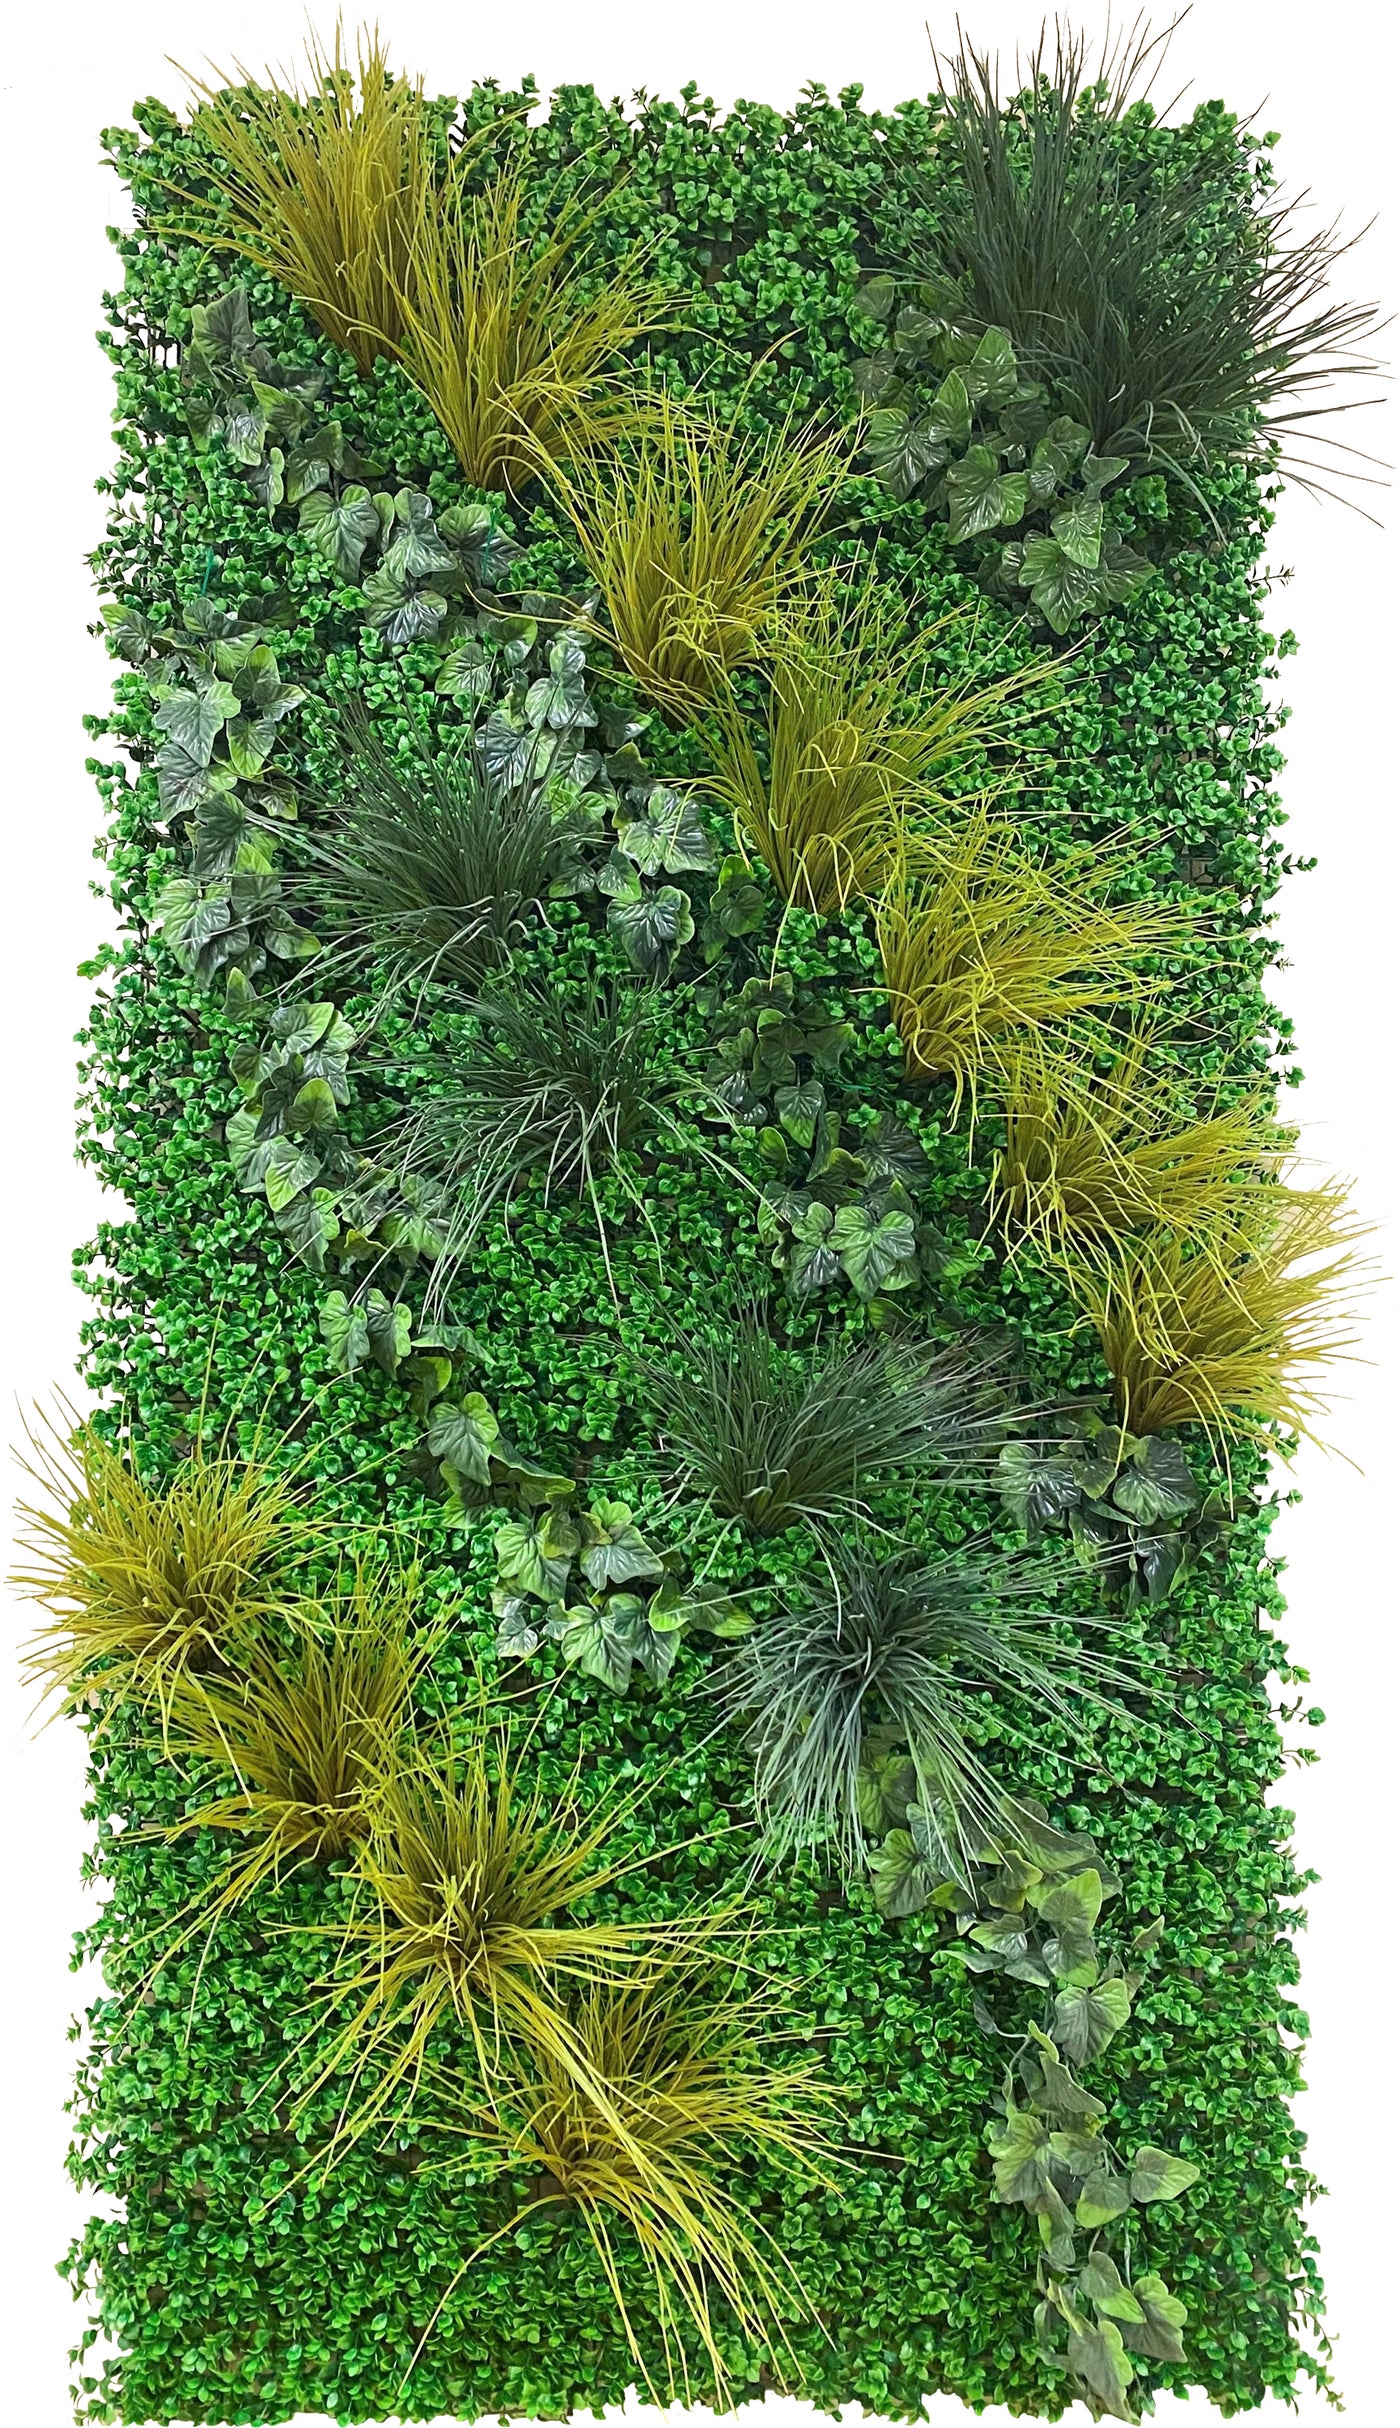 Wholesale Artificial Green Living Wallscape, Pachysandra, Grasses and Ivy Outdoor 4' X 8' - Enduraleaf by New Growth Designs